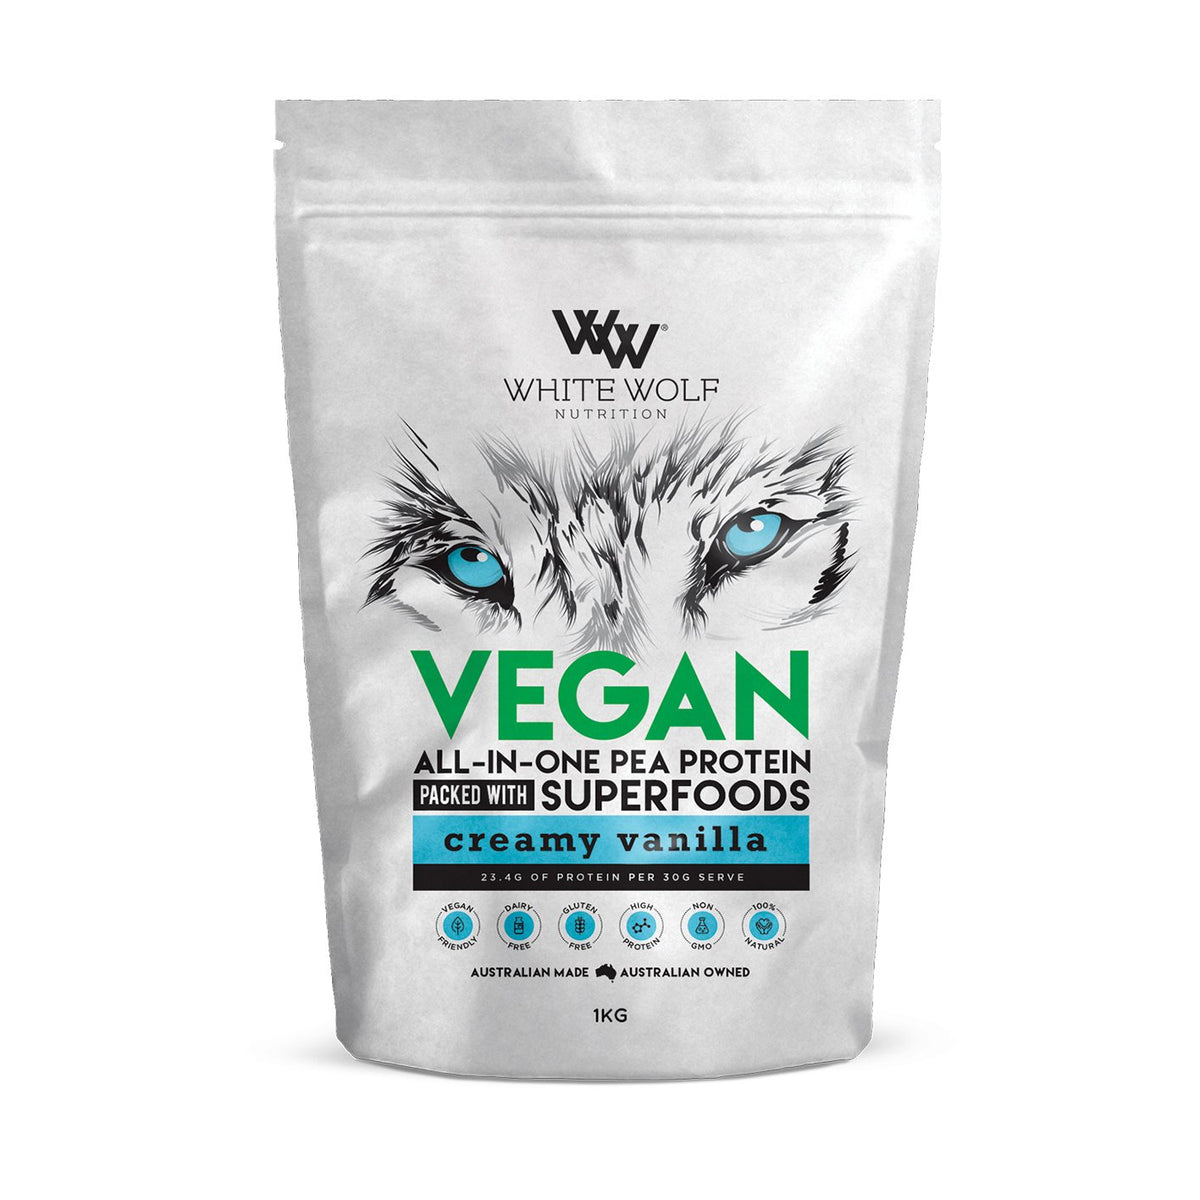 Vegan All-In-One Pea Protein